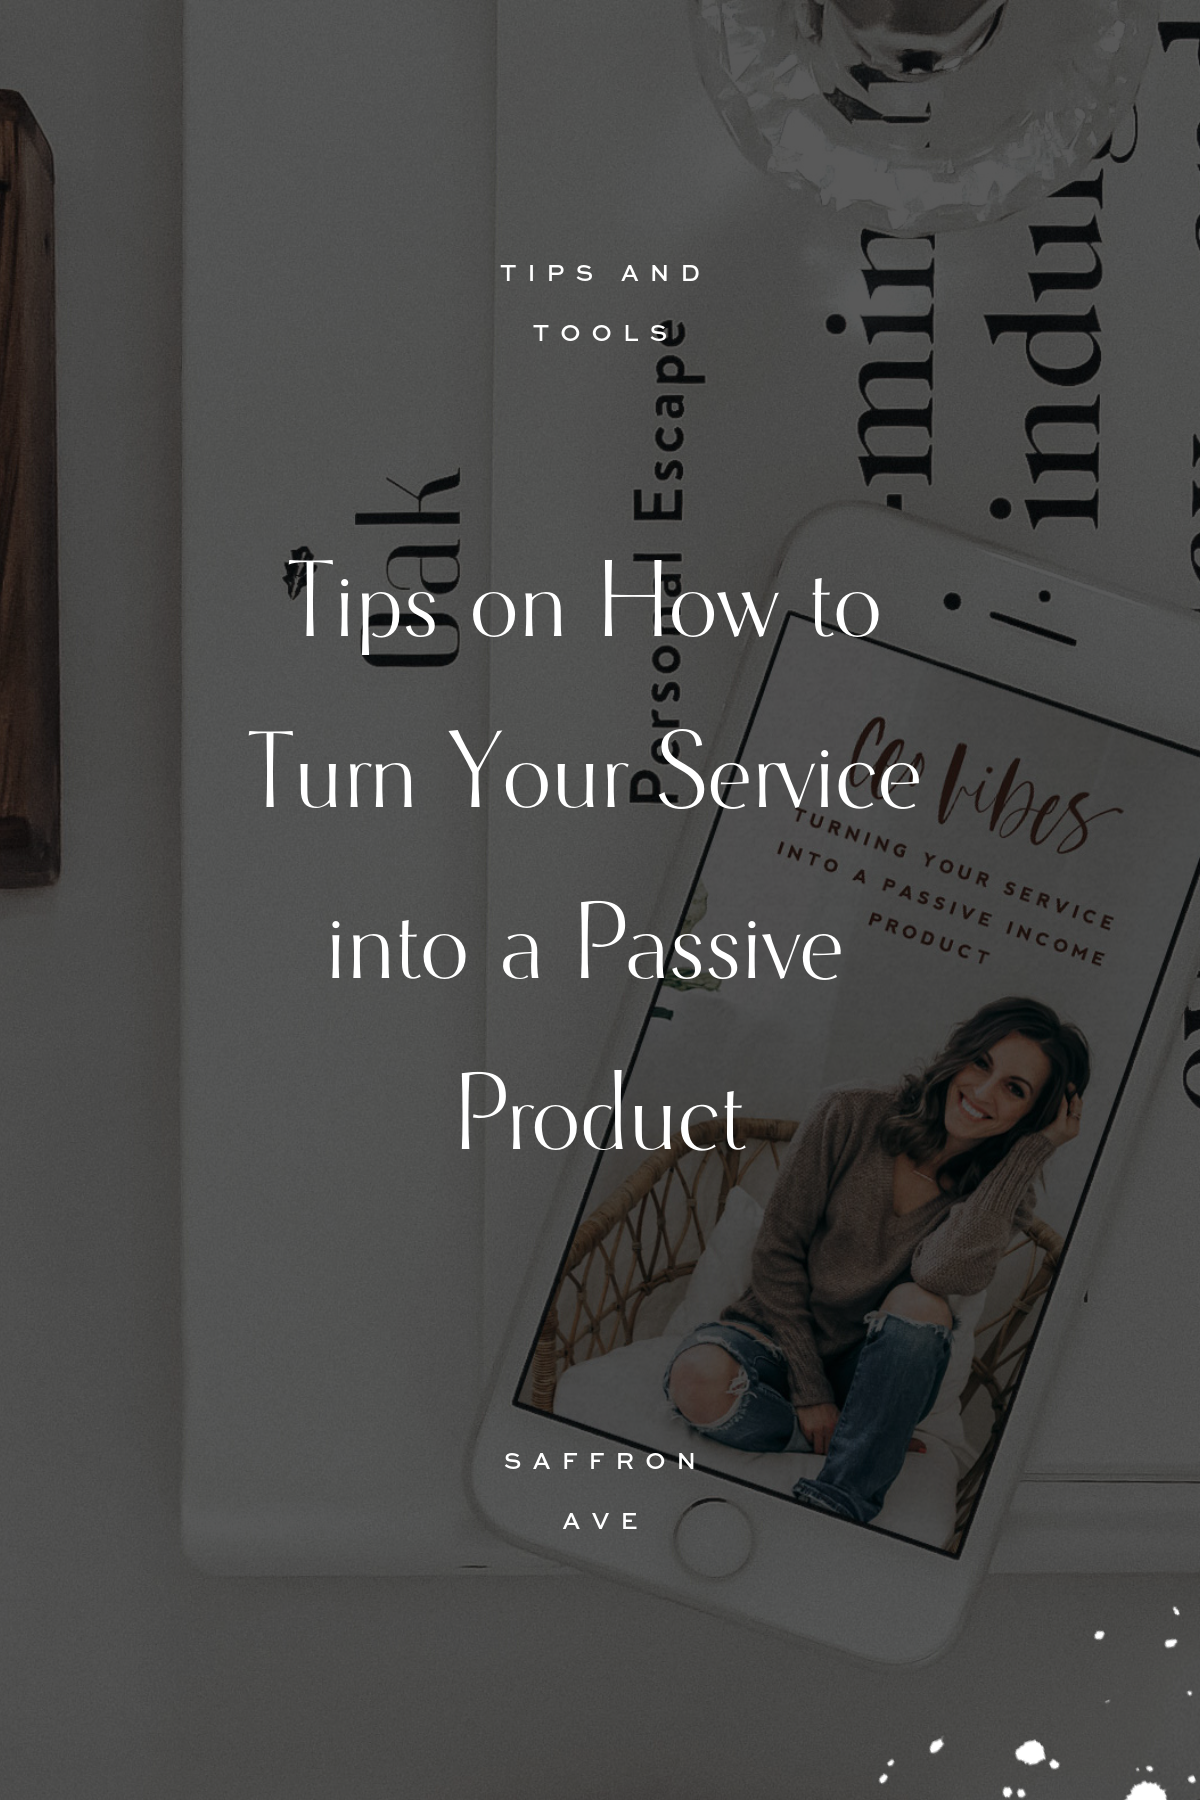 How I turned my design service into a passive product